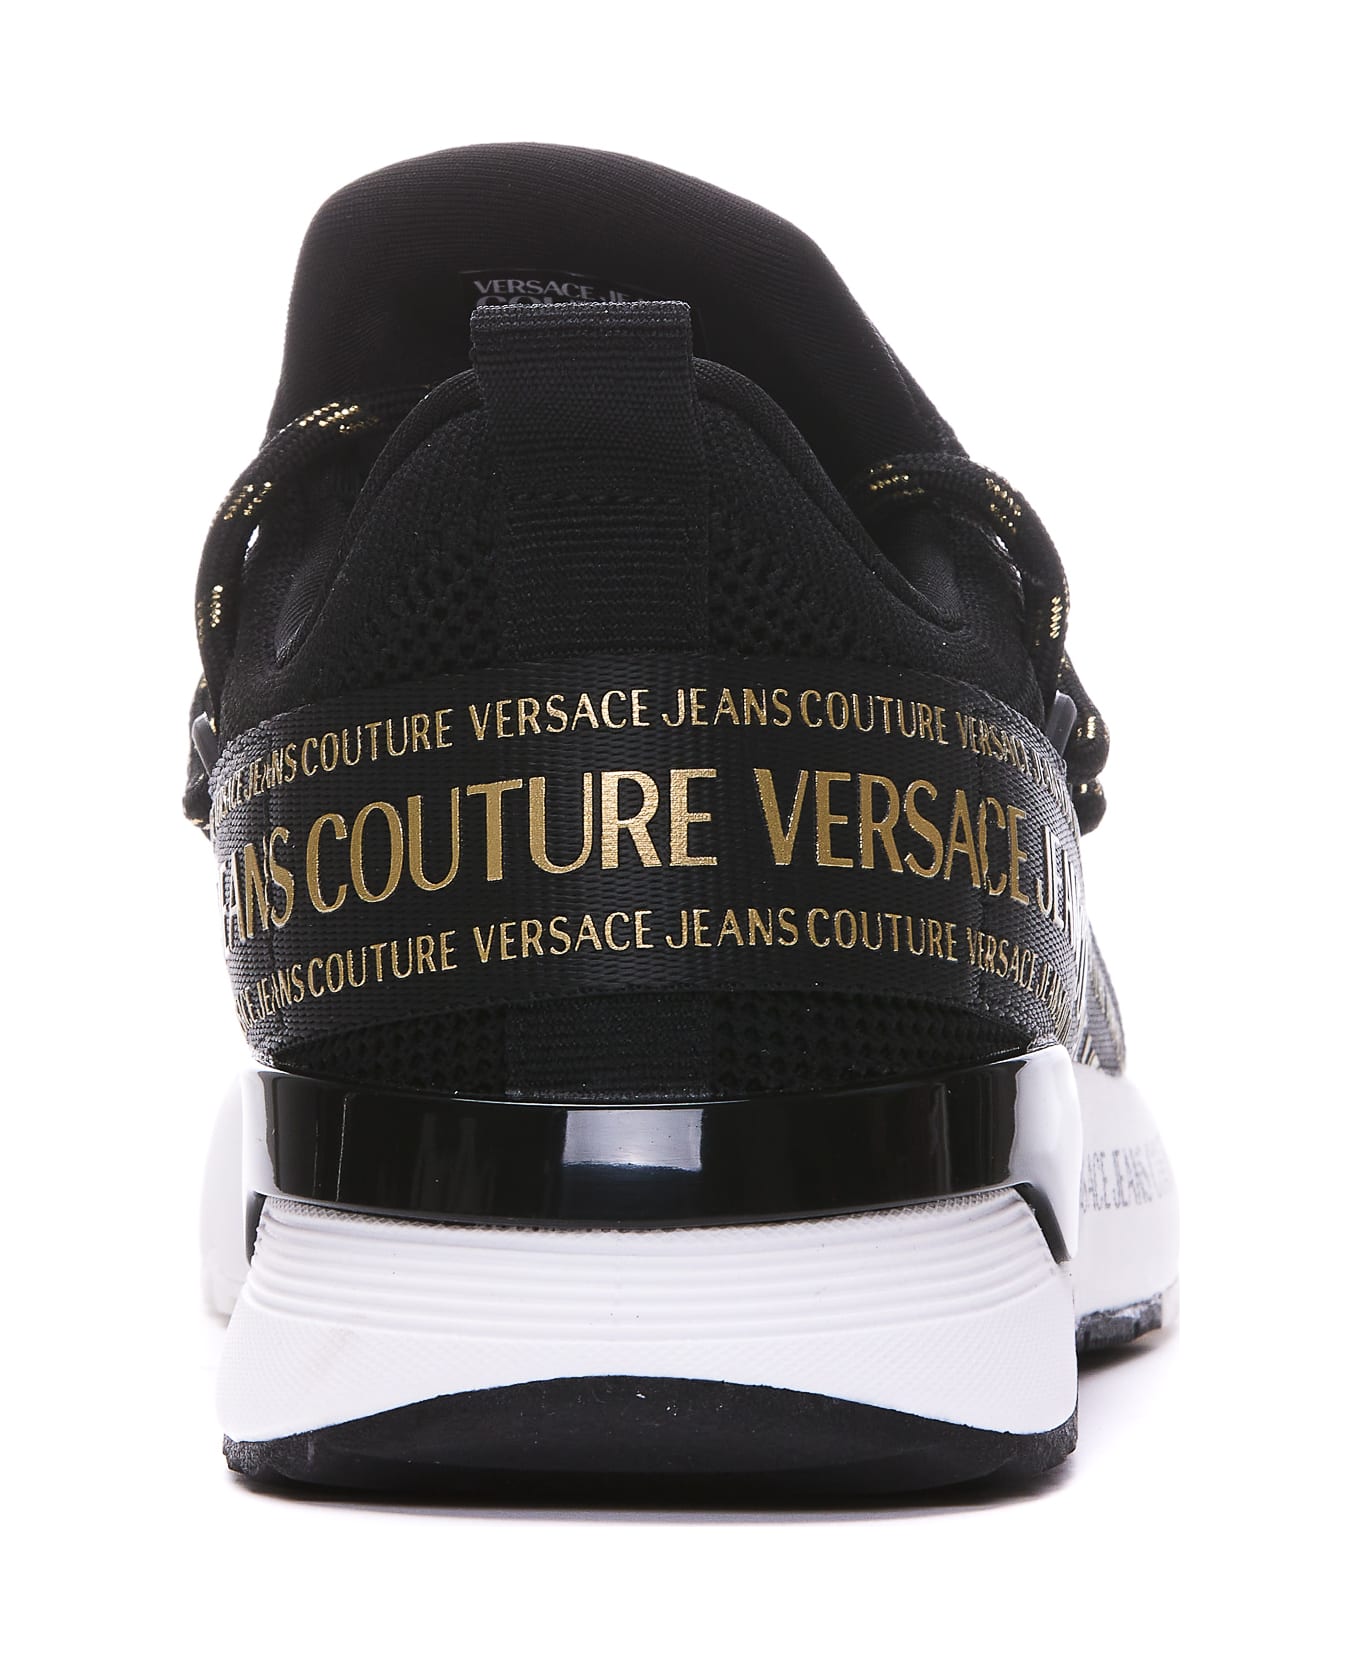 Versace Jeans Couture Dynamic Sneakers - BLACK/GOLD スニーカー